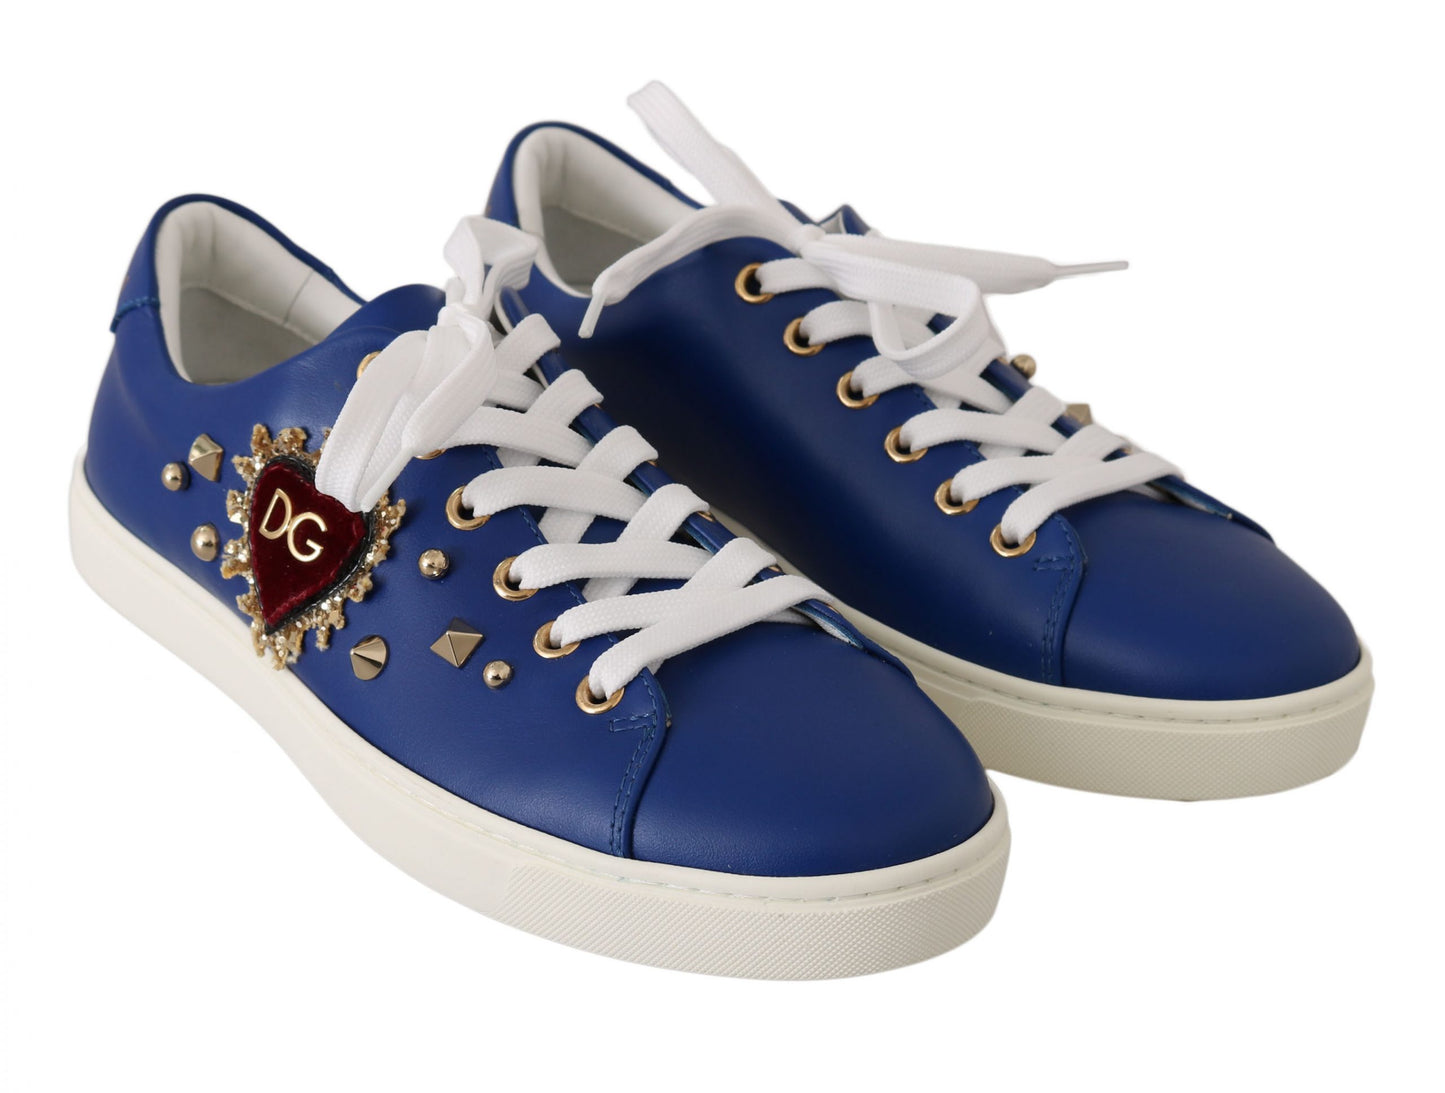 Chic Blue Leather Sneakers with Velvet Heart